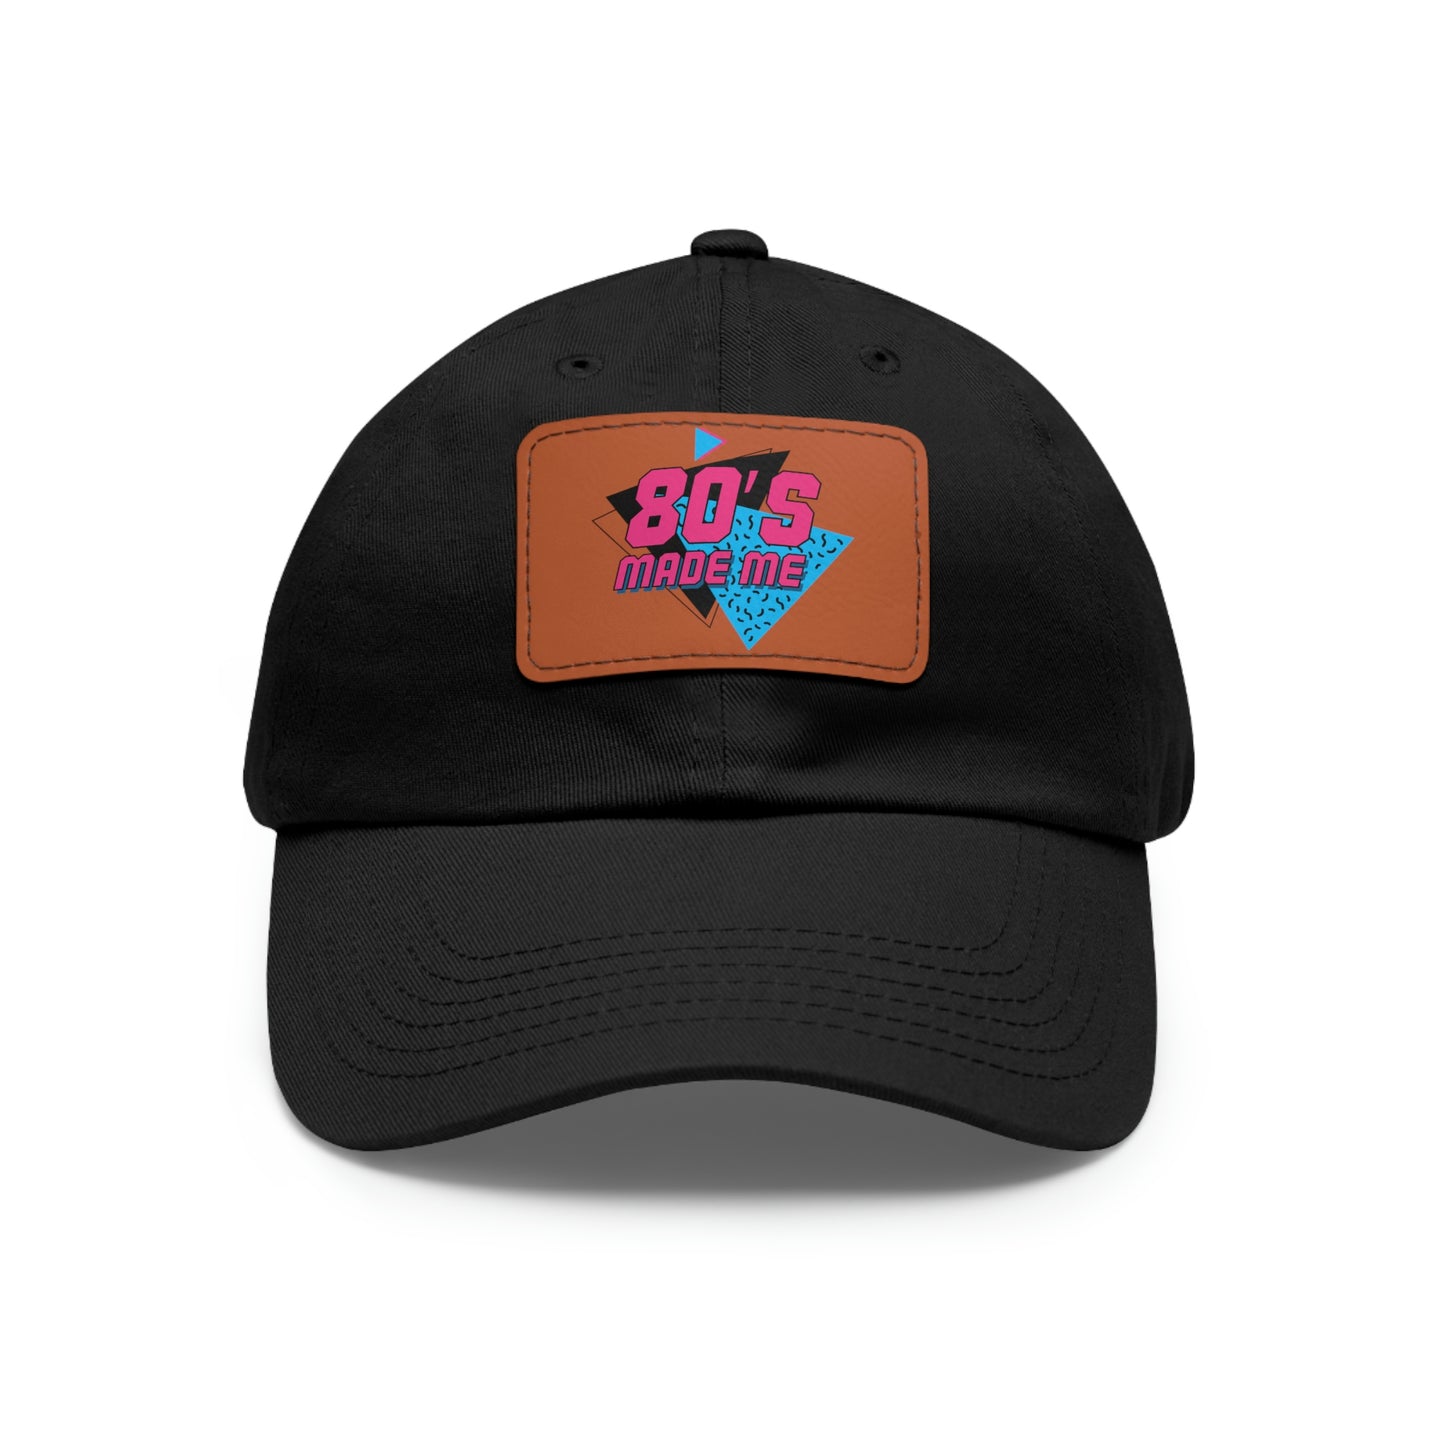 80s Made Me Dad Hat with Leather Patch